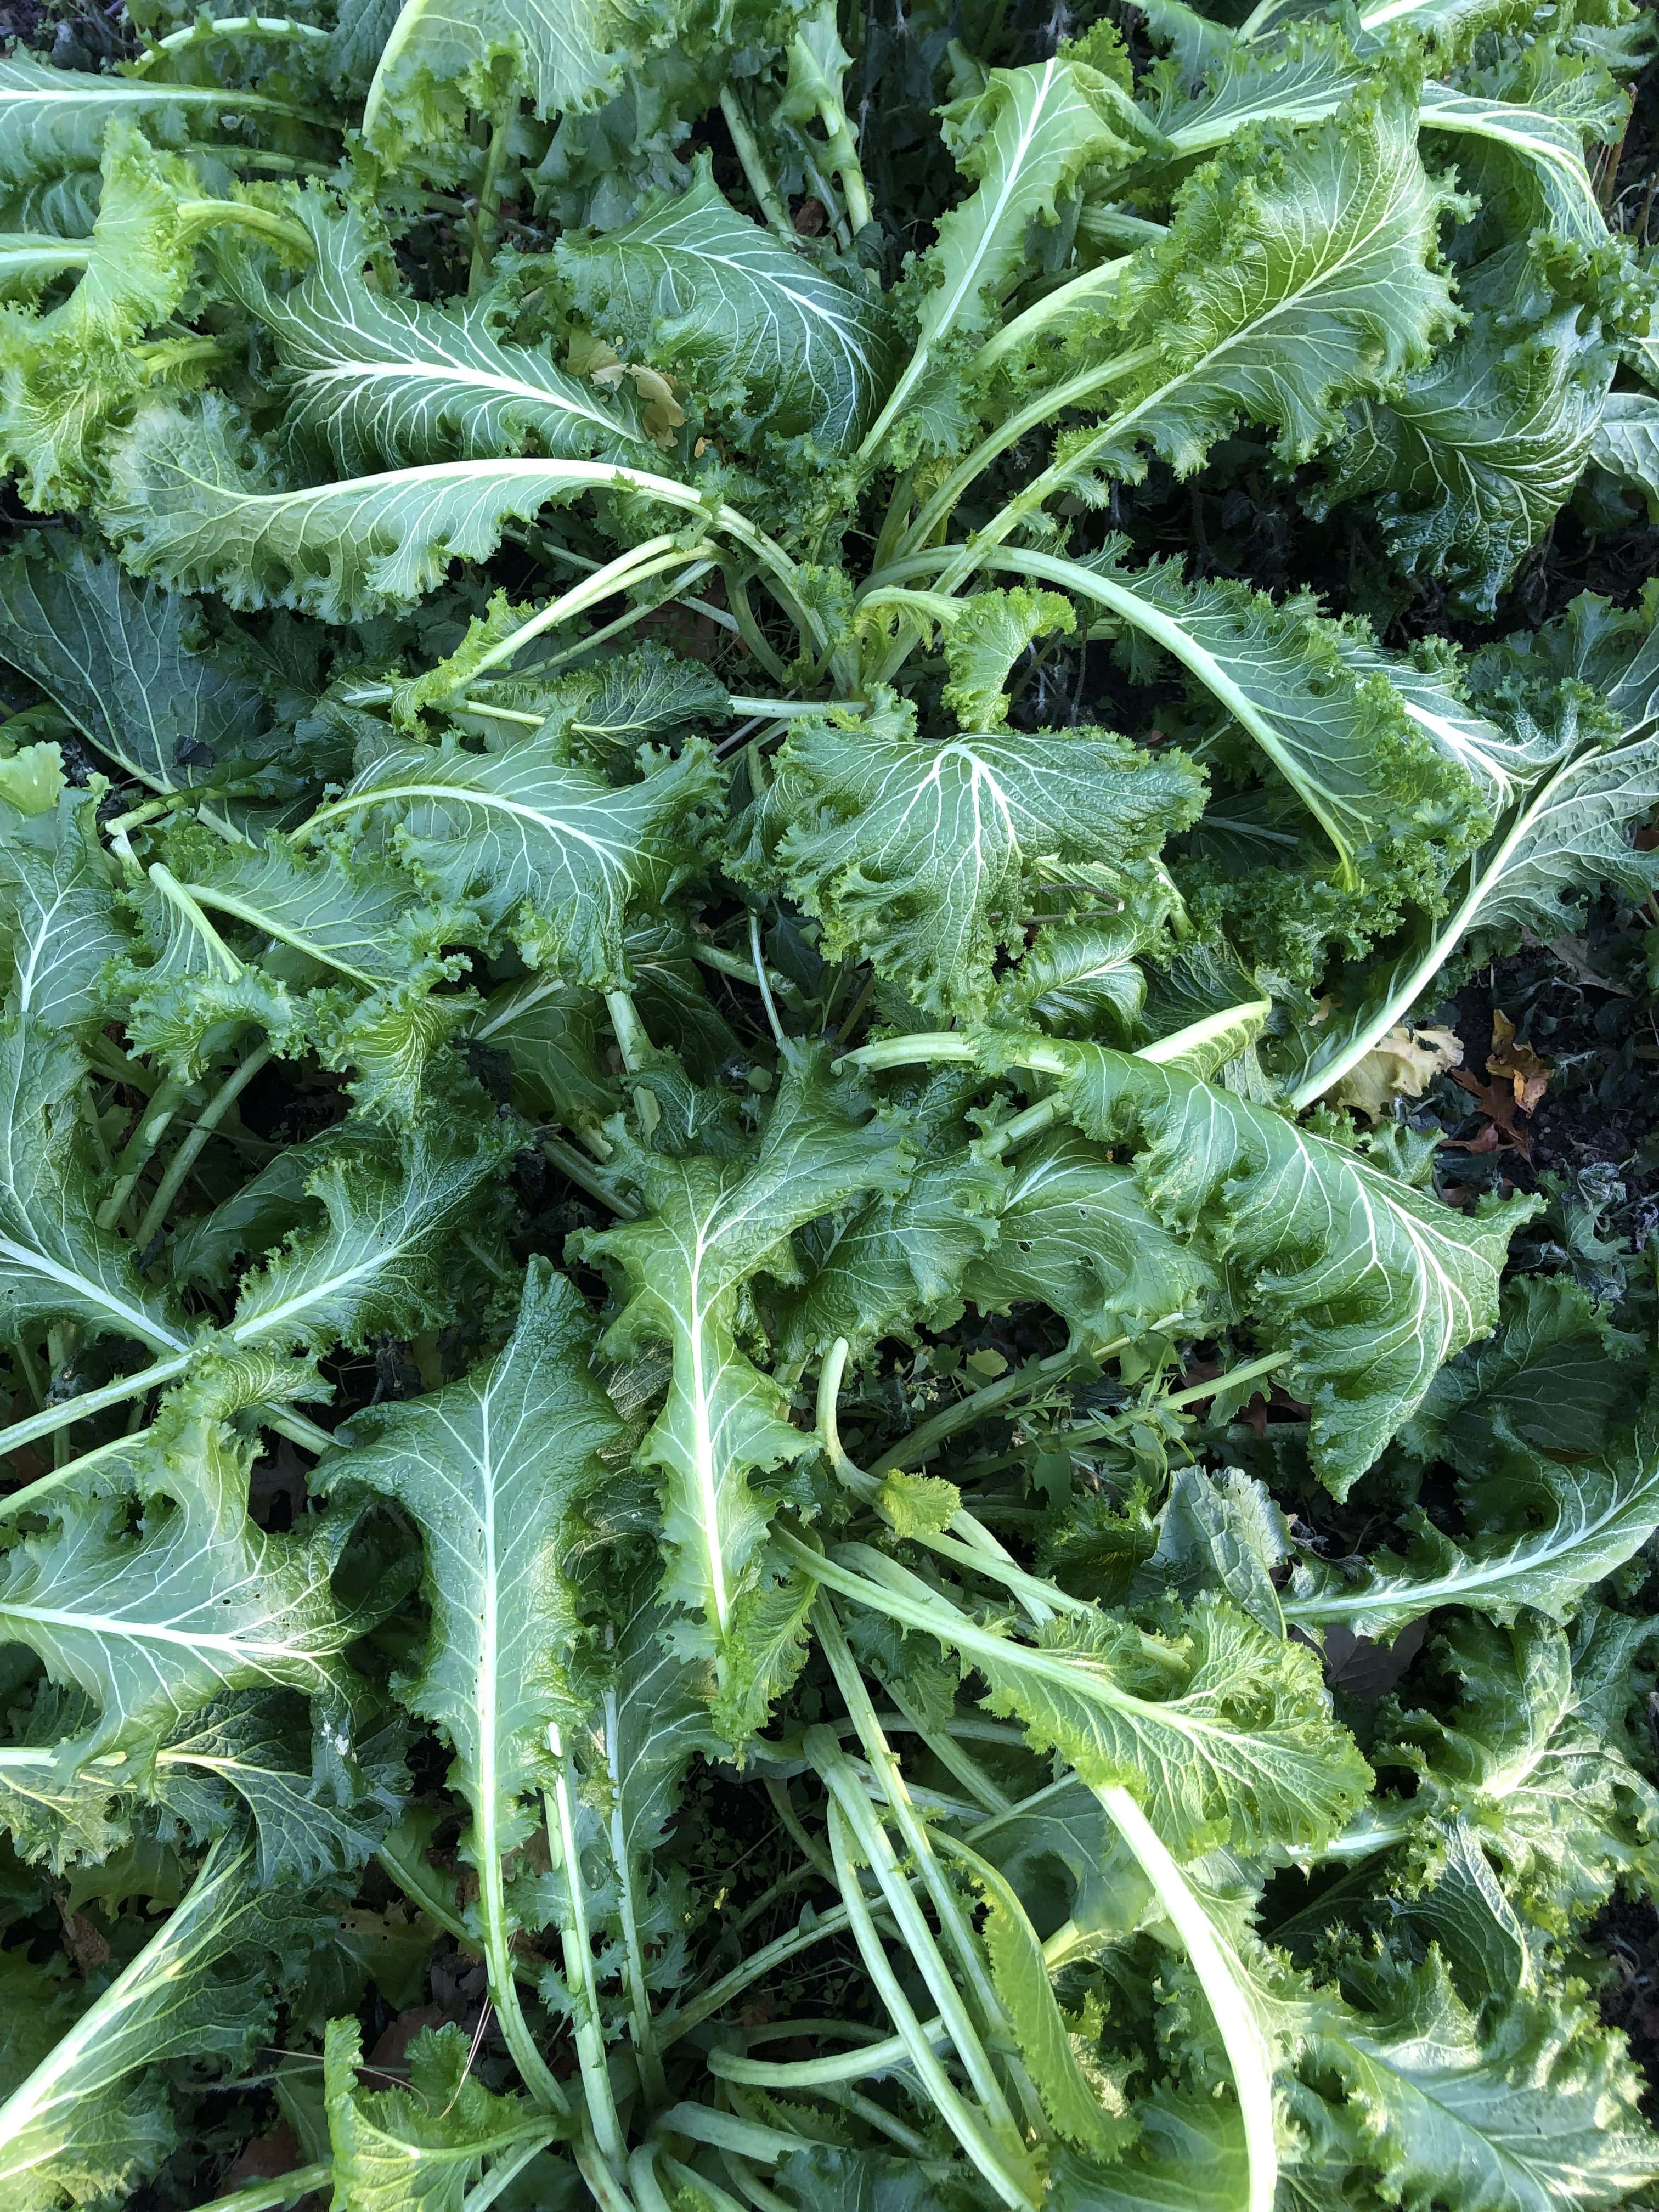 mustard green plants wilted from being frozen